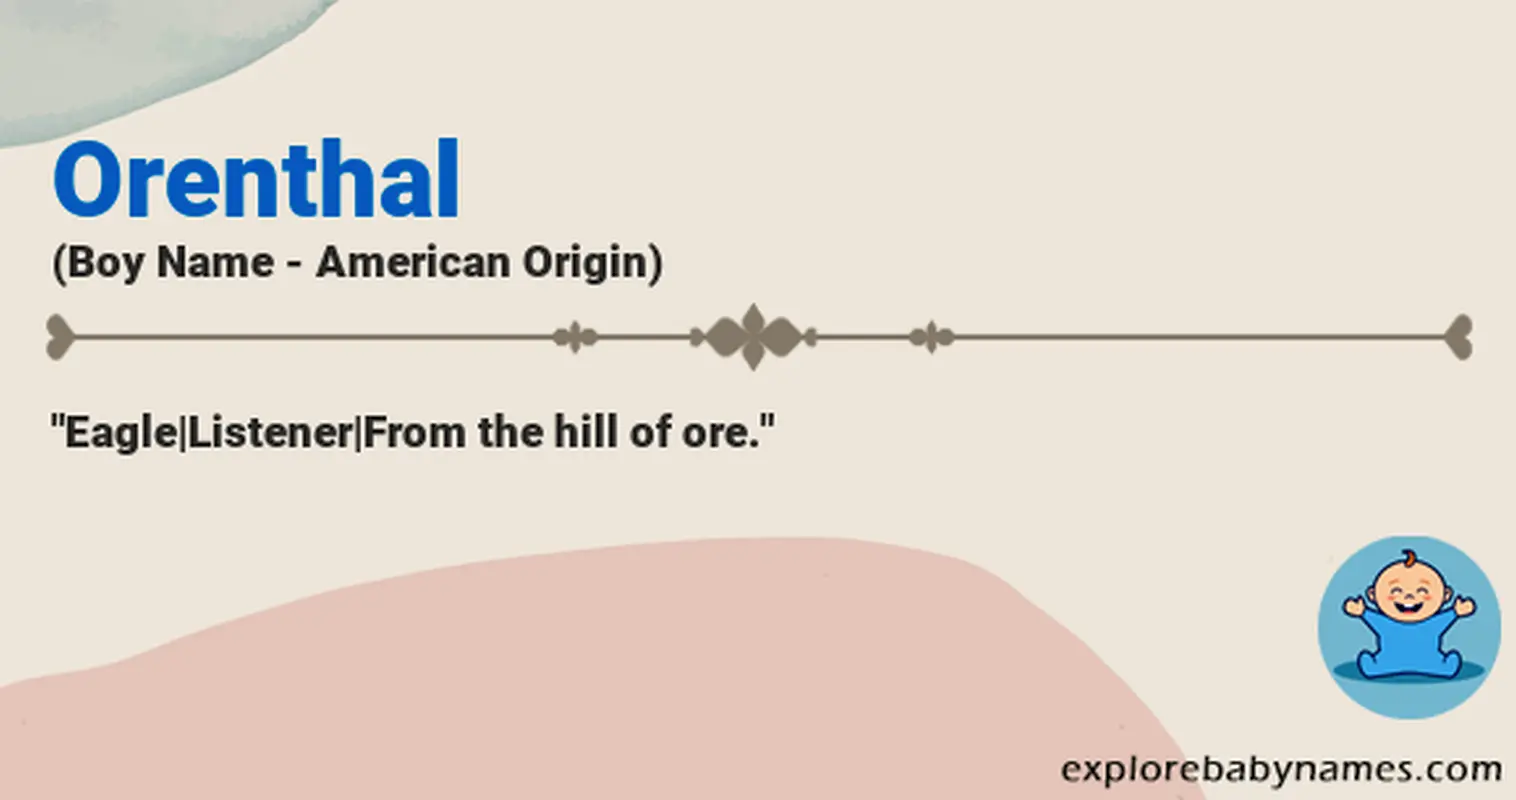 Meaning of Orenthal